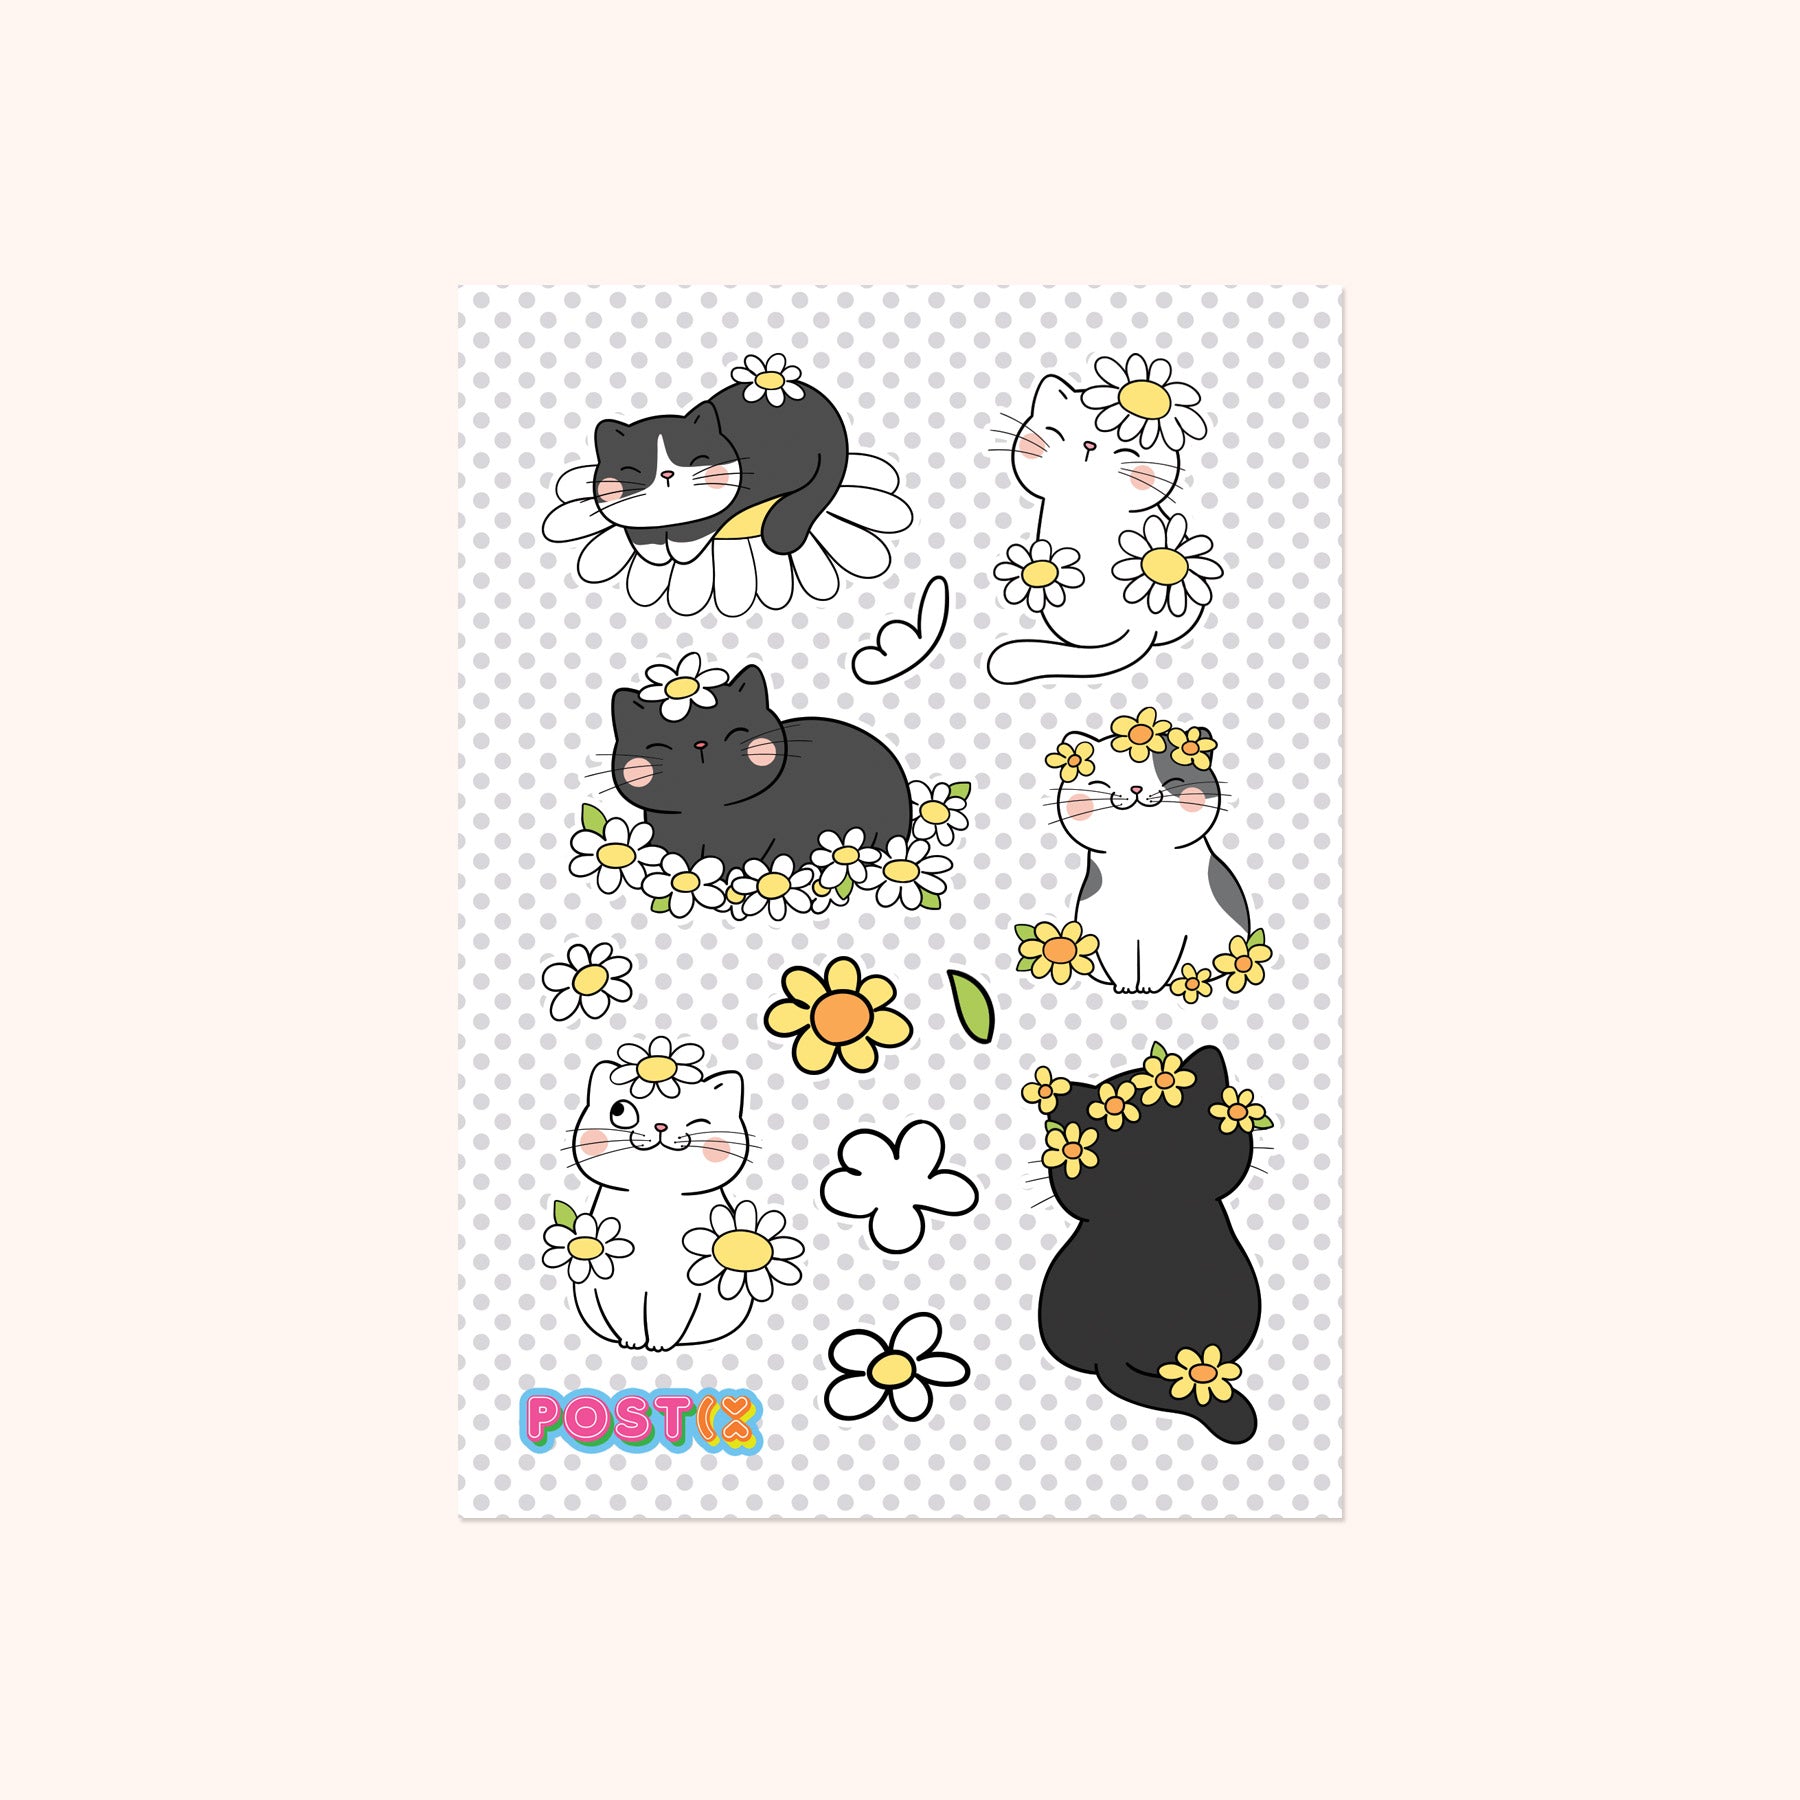 Sassy Cat Stickers and Decal Sheets